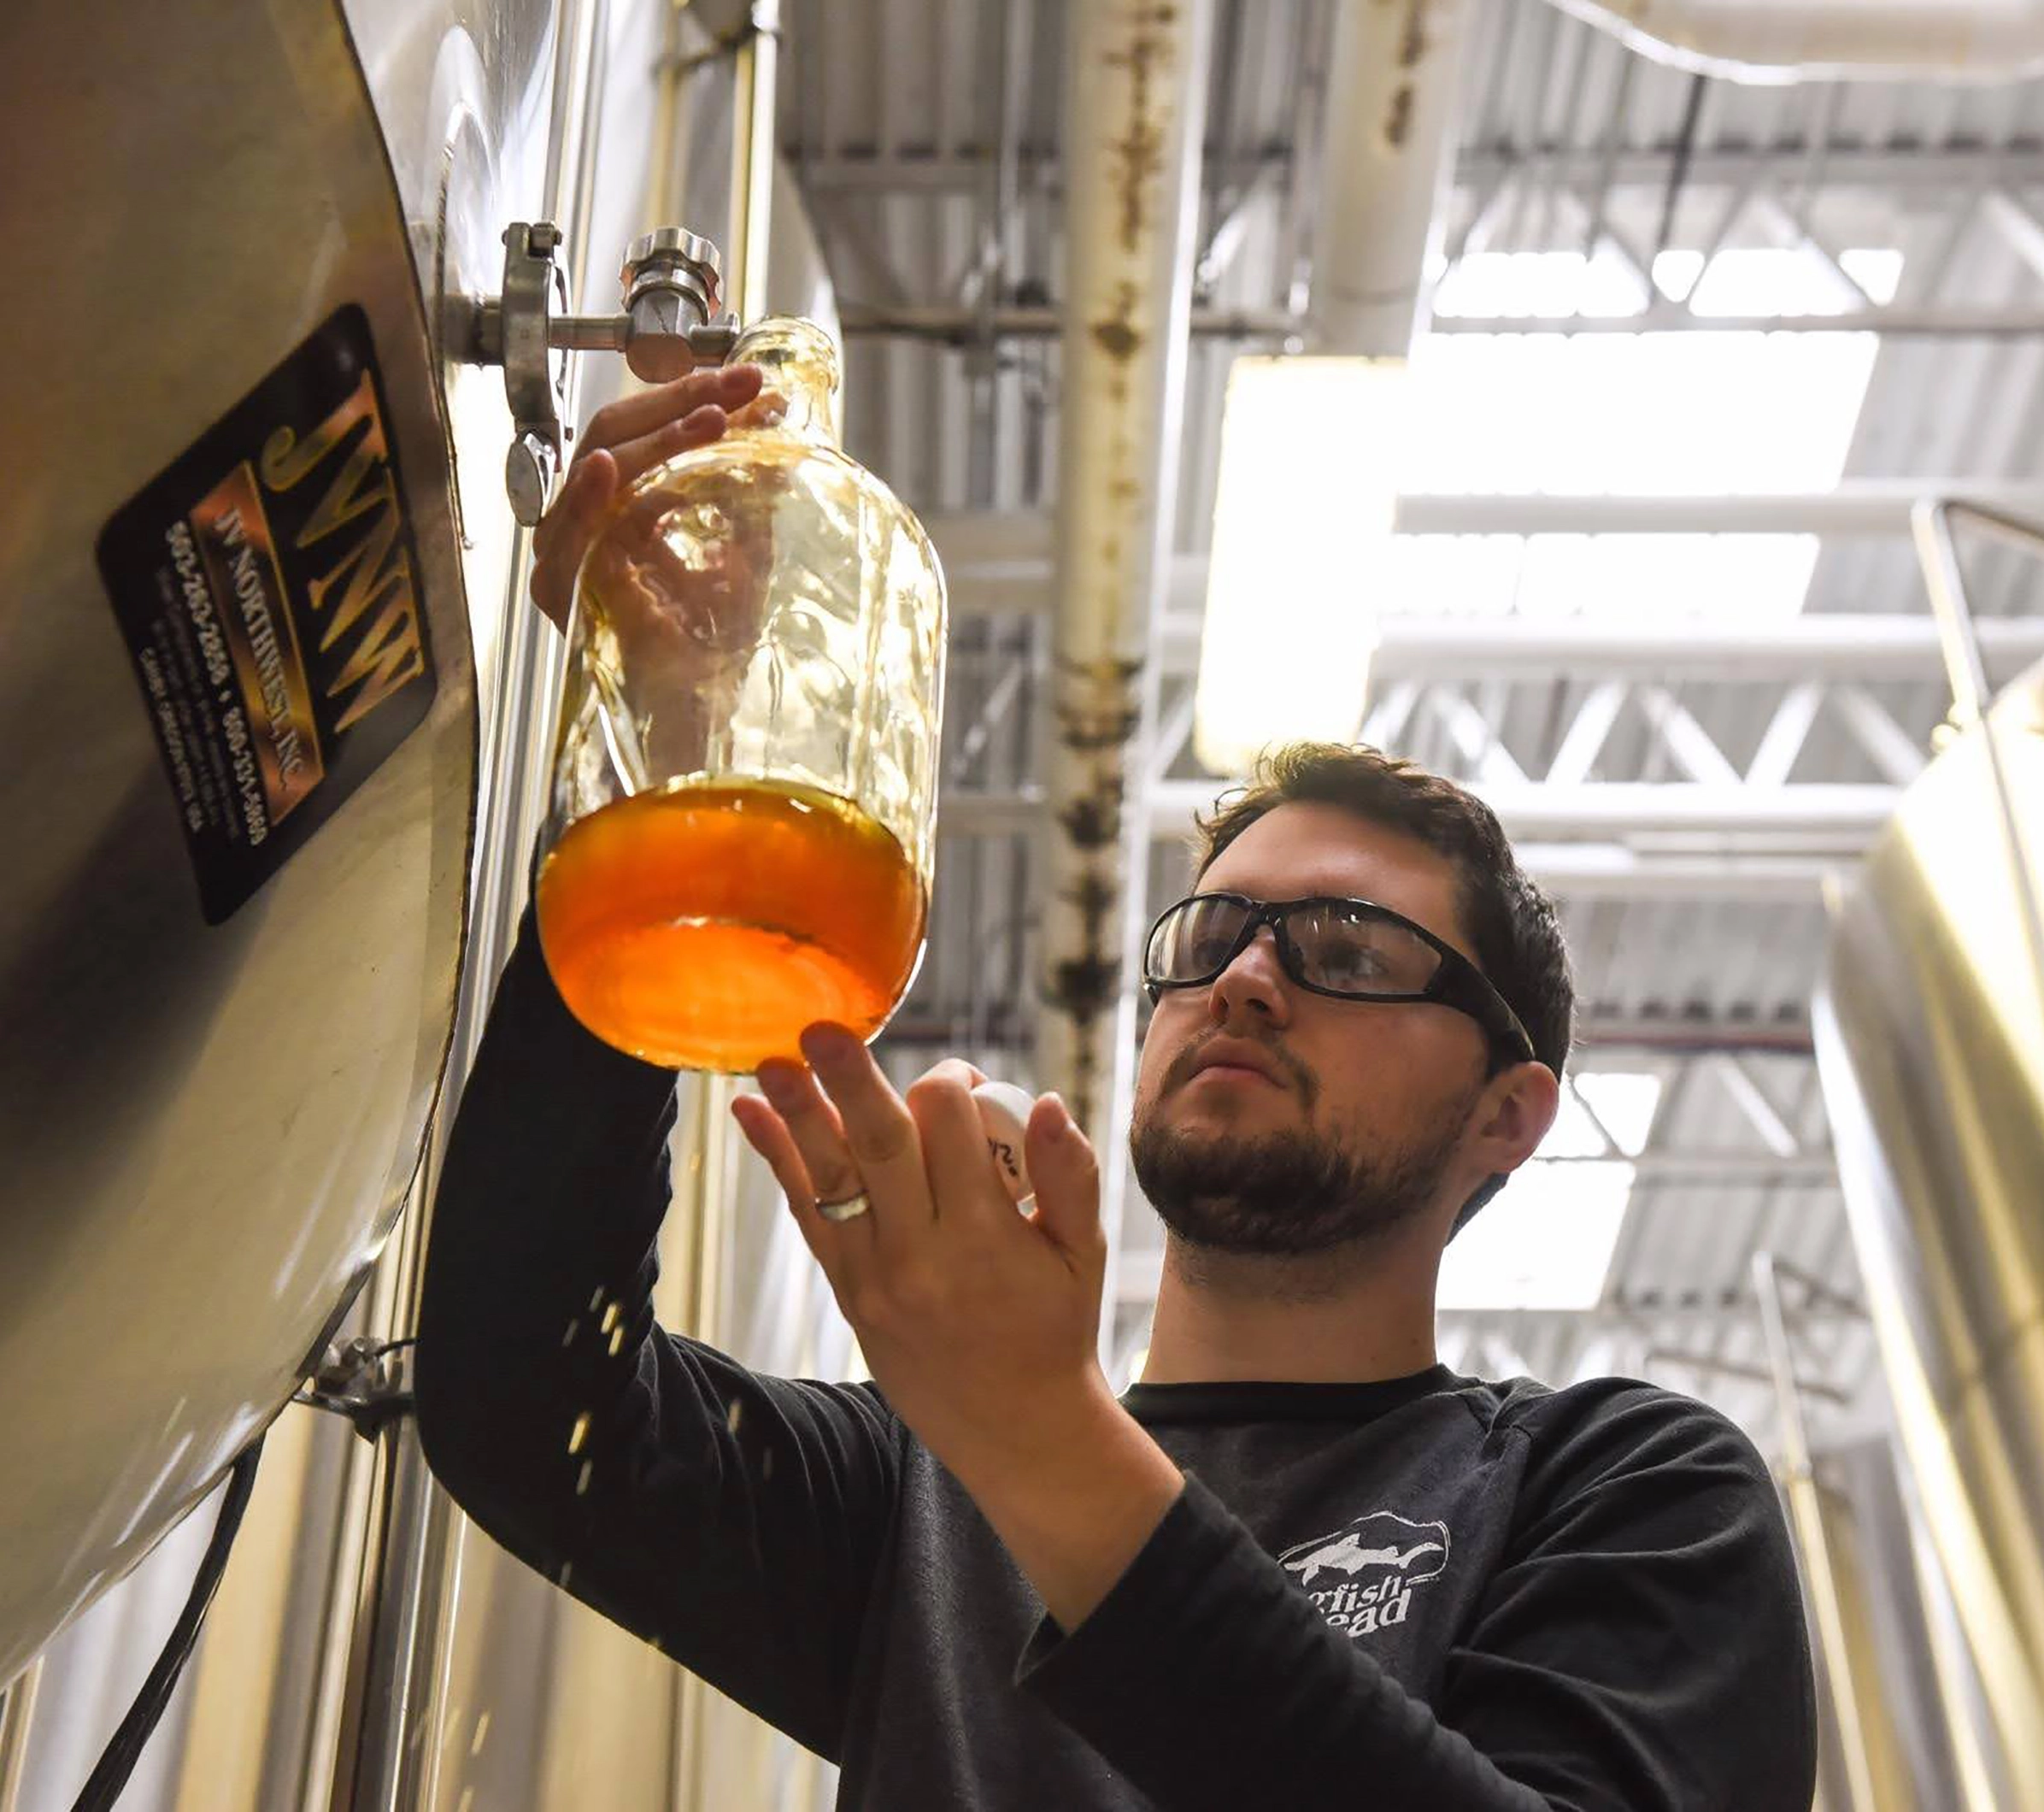 Arcadia Honors Student works on a beer chemistry project.